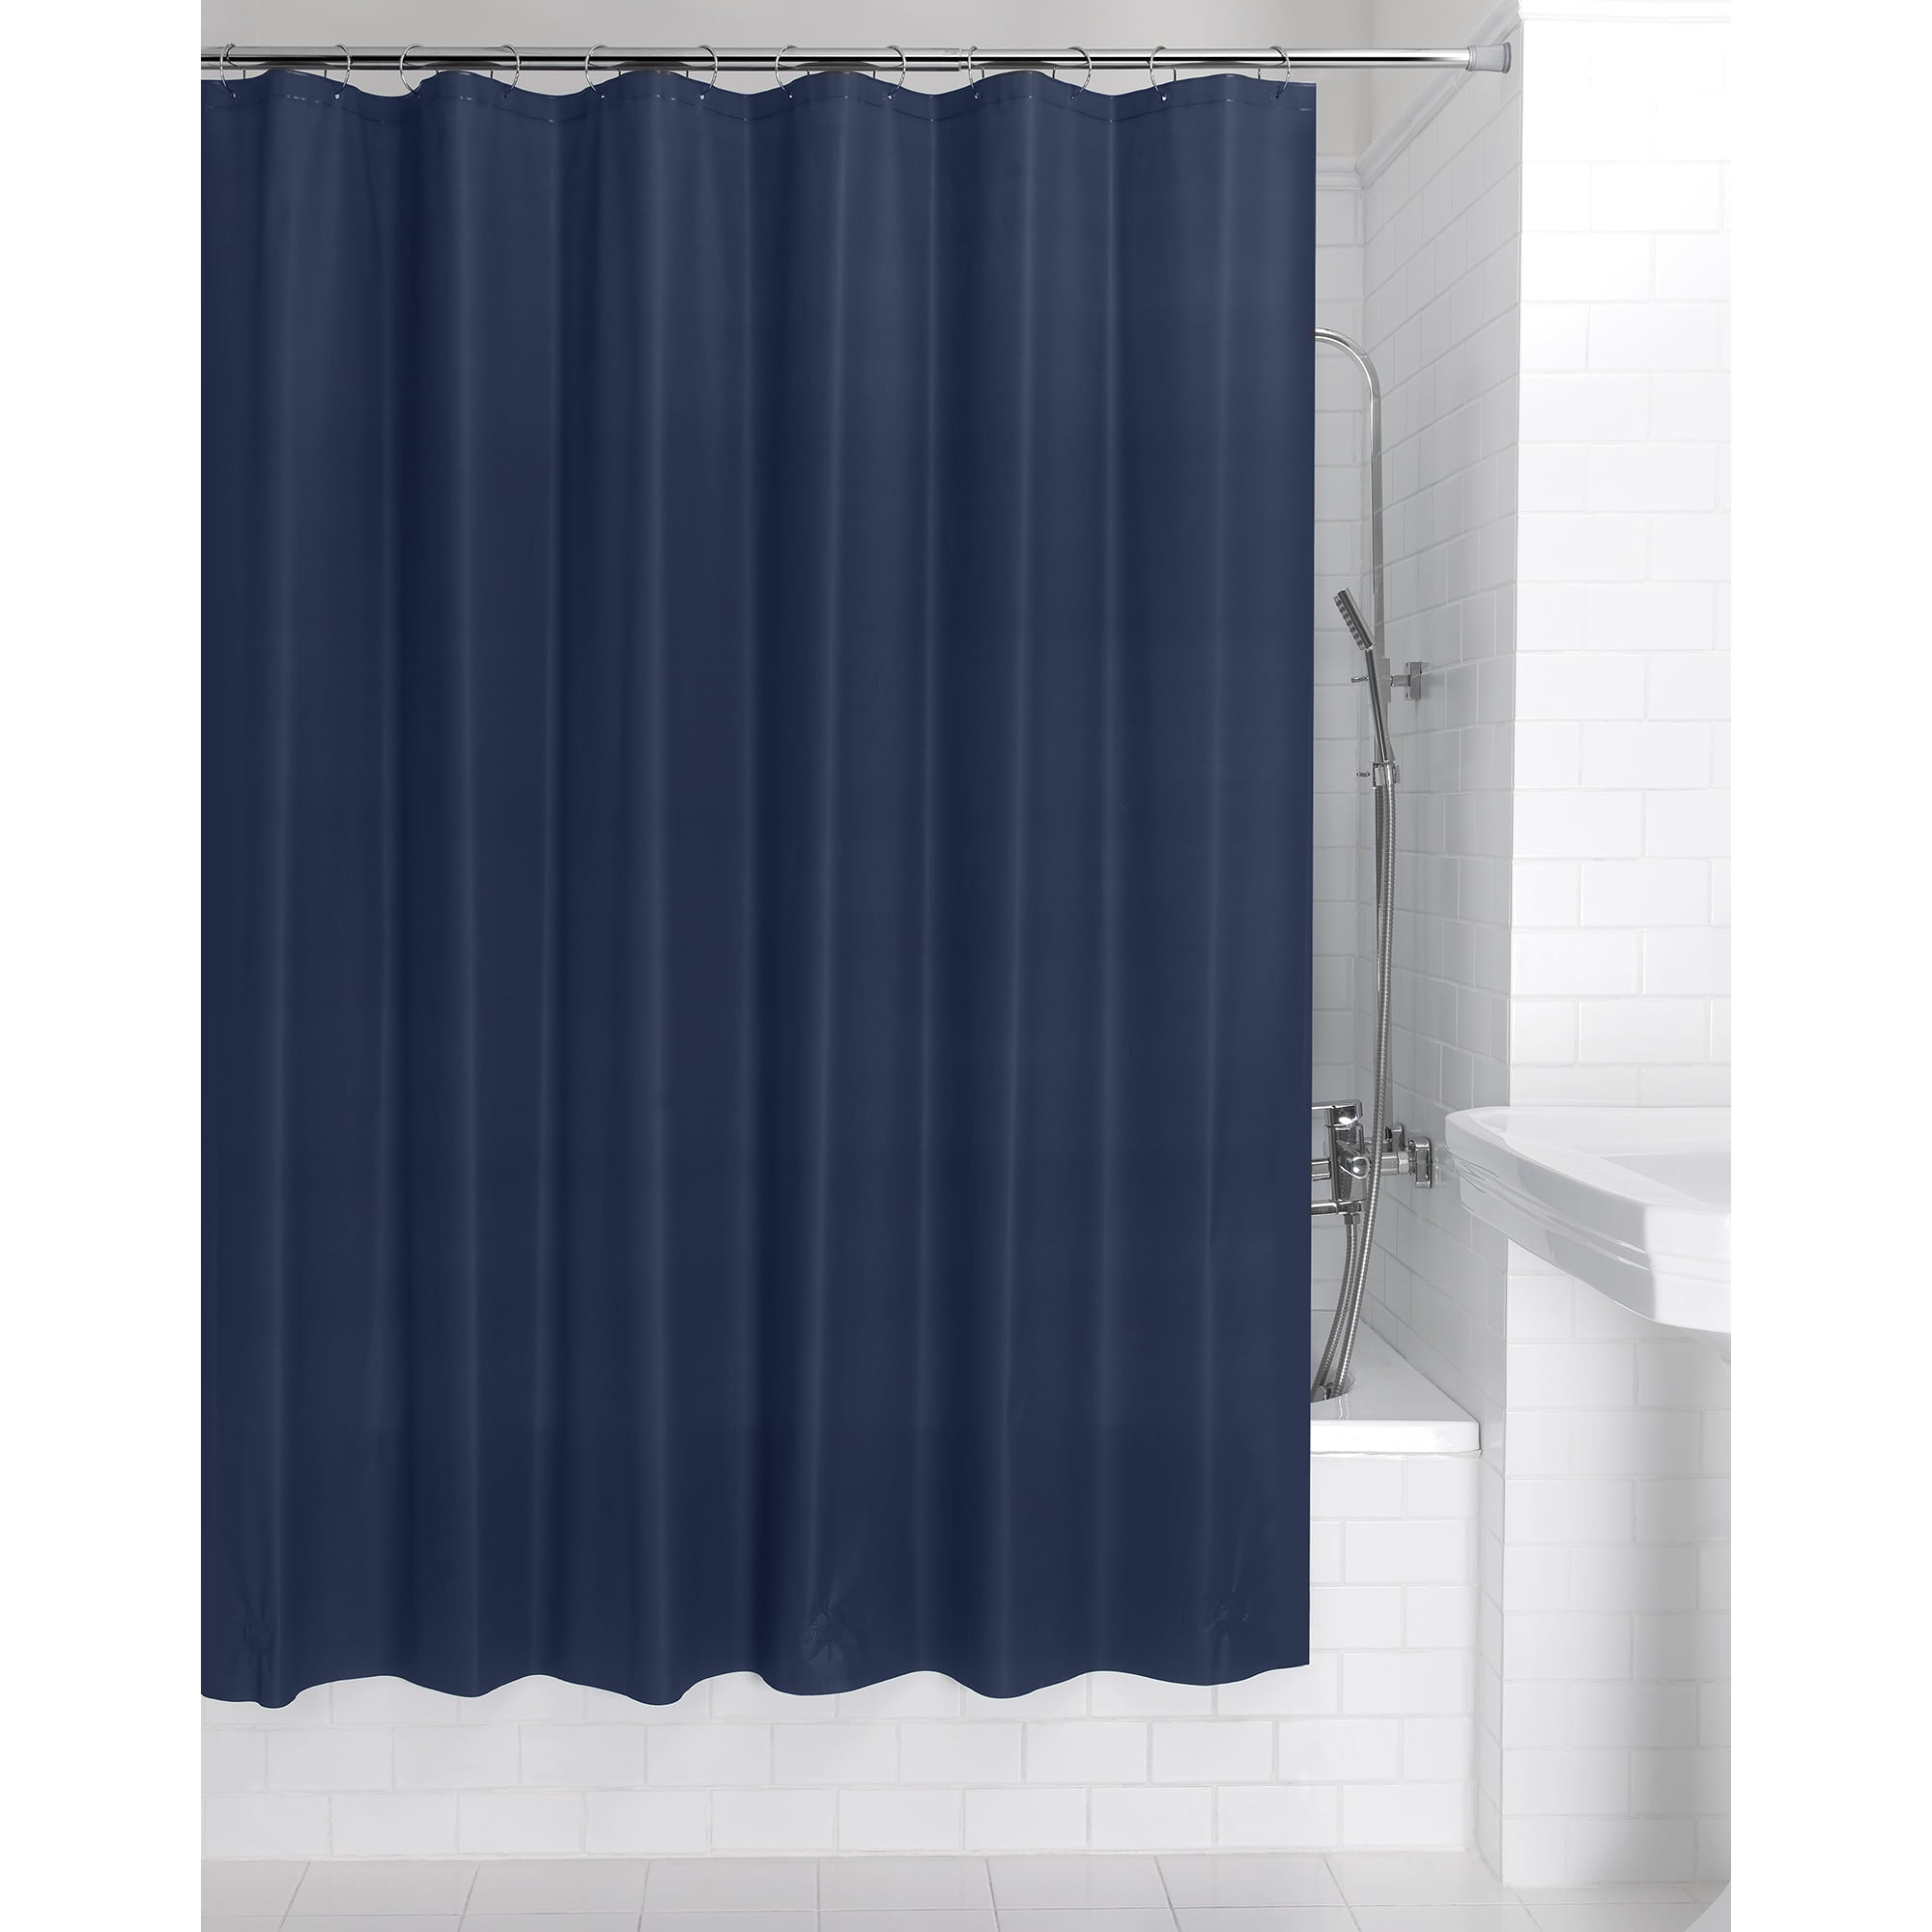 Mainstays Basic Light Weight Thickness PEVA Solid Shower Curtain Liner, Weighted Magnetized Hem, Dark Blue, 70" x 71"